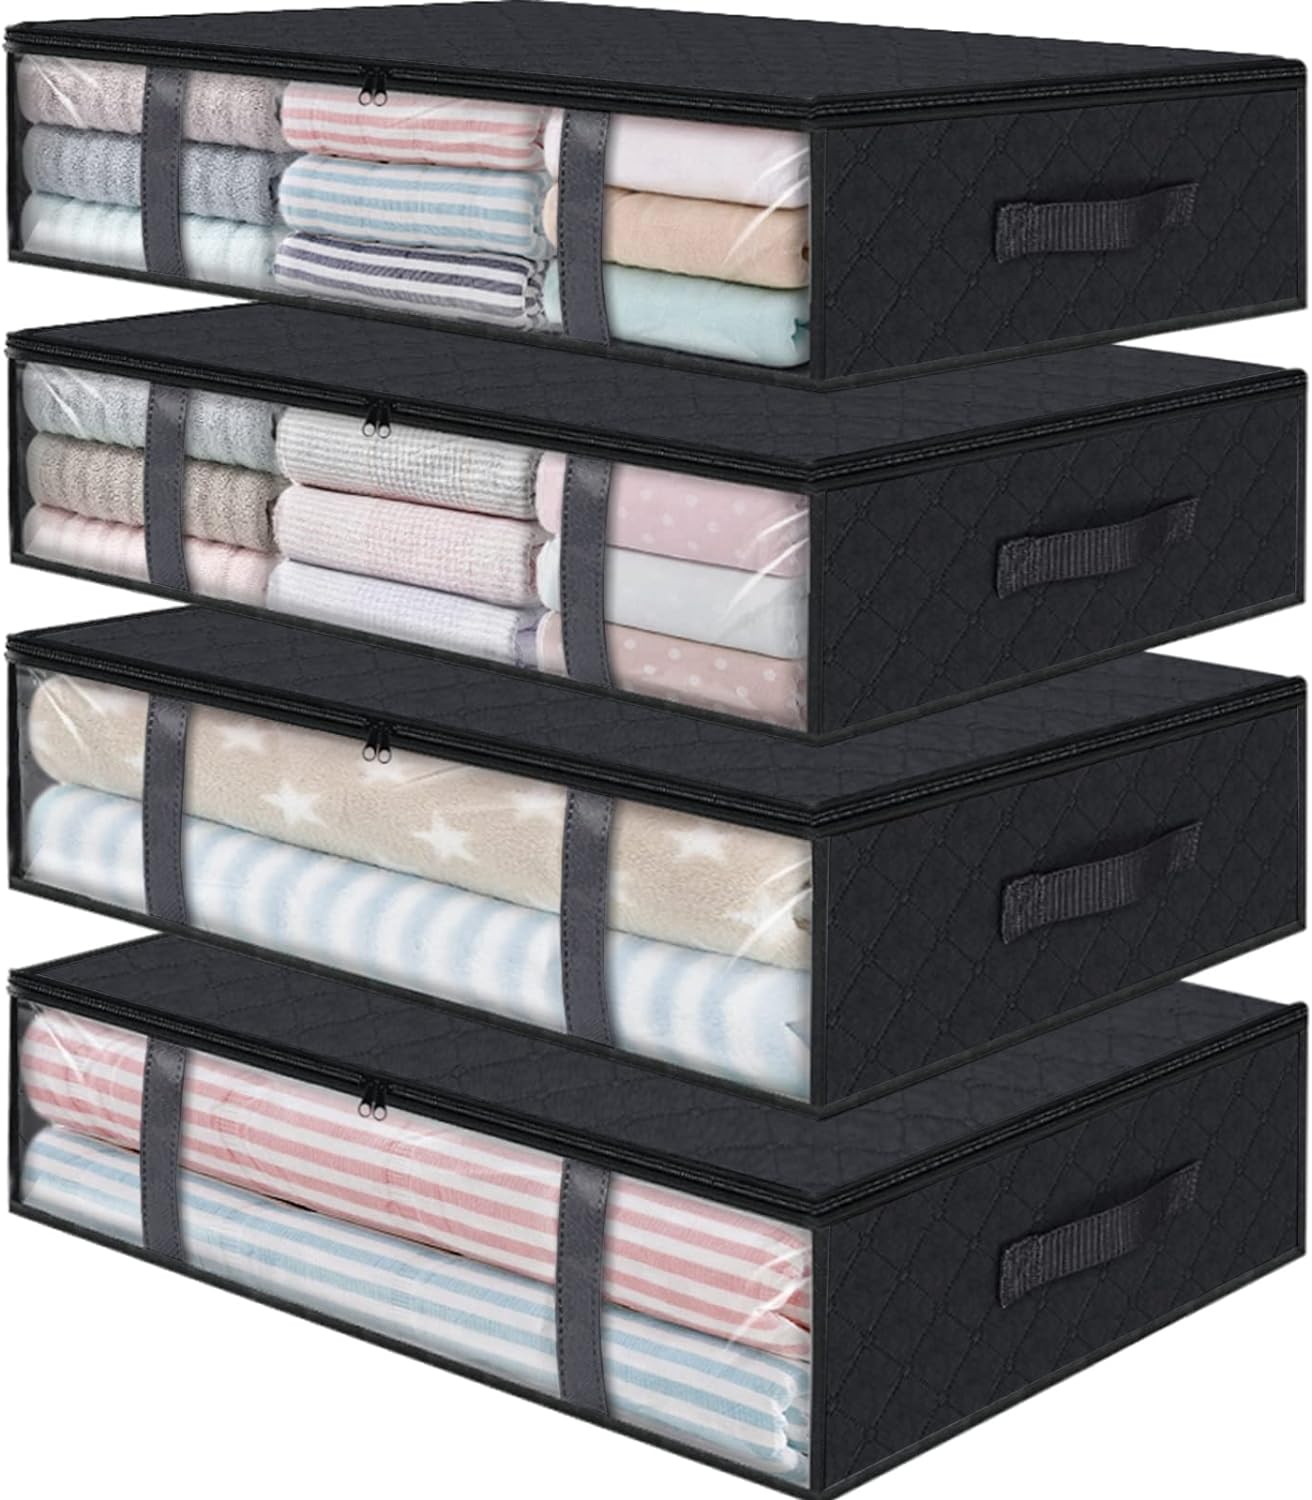 StorageRight Storage Bins Clothes Storage, Foldable Blanket Storage Bags, Under Bed Storage Containers for Organizing, Clothing, Bedroom, Comforter, Closet, Dorm, Quilts, Organizer, 4-Pack Black